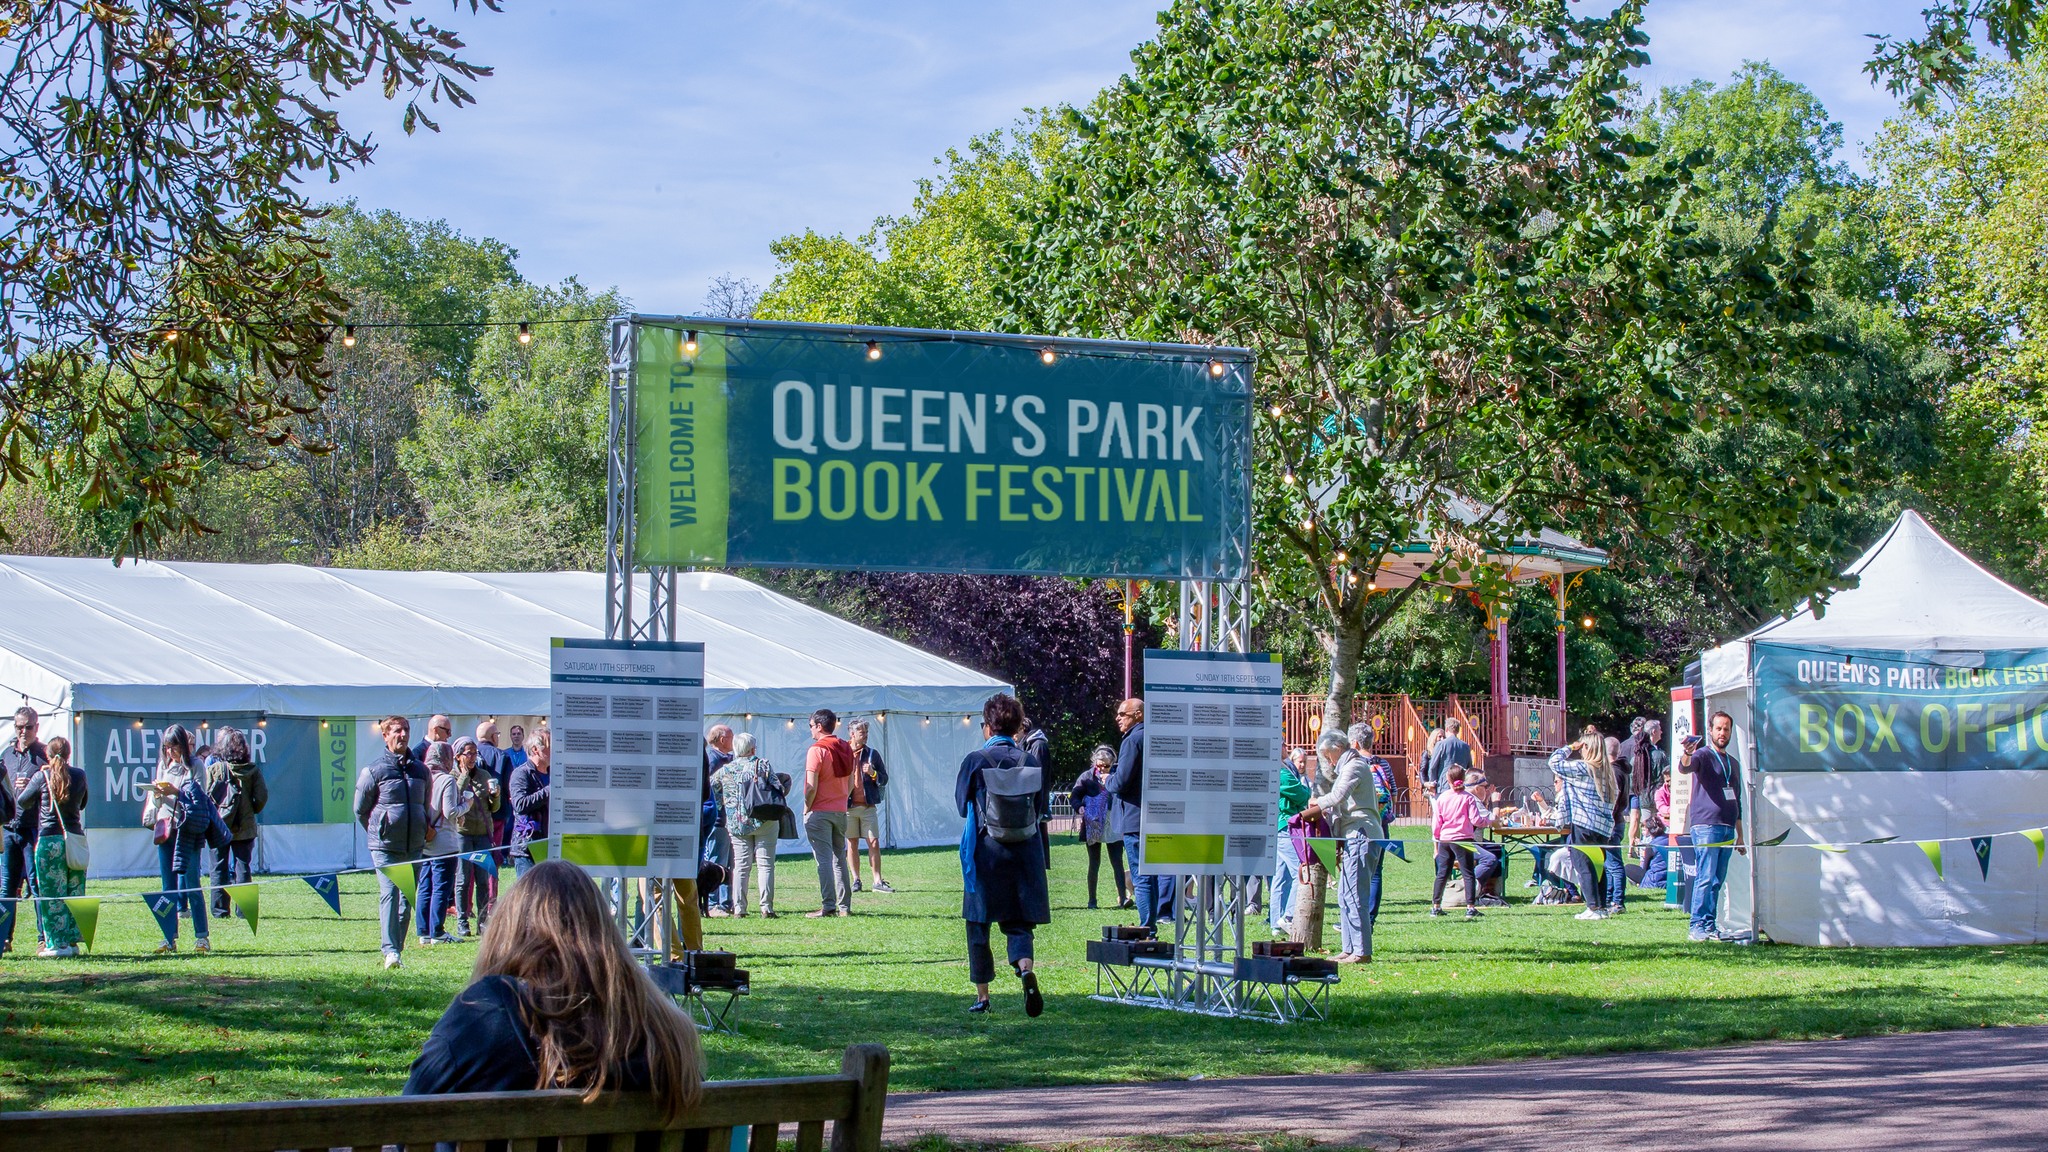 17 Facts About Queen's Park Book Festival - Facts.net